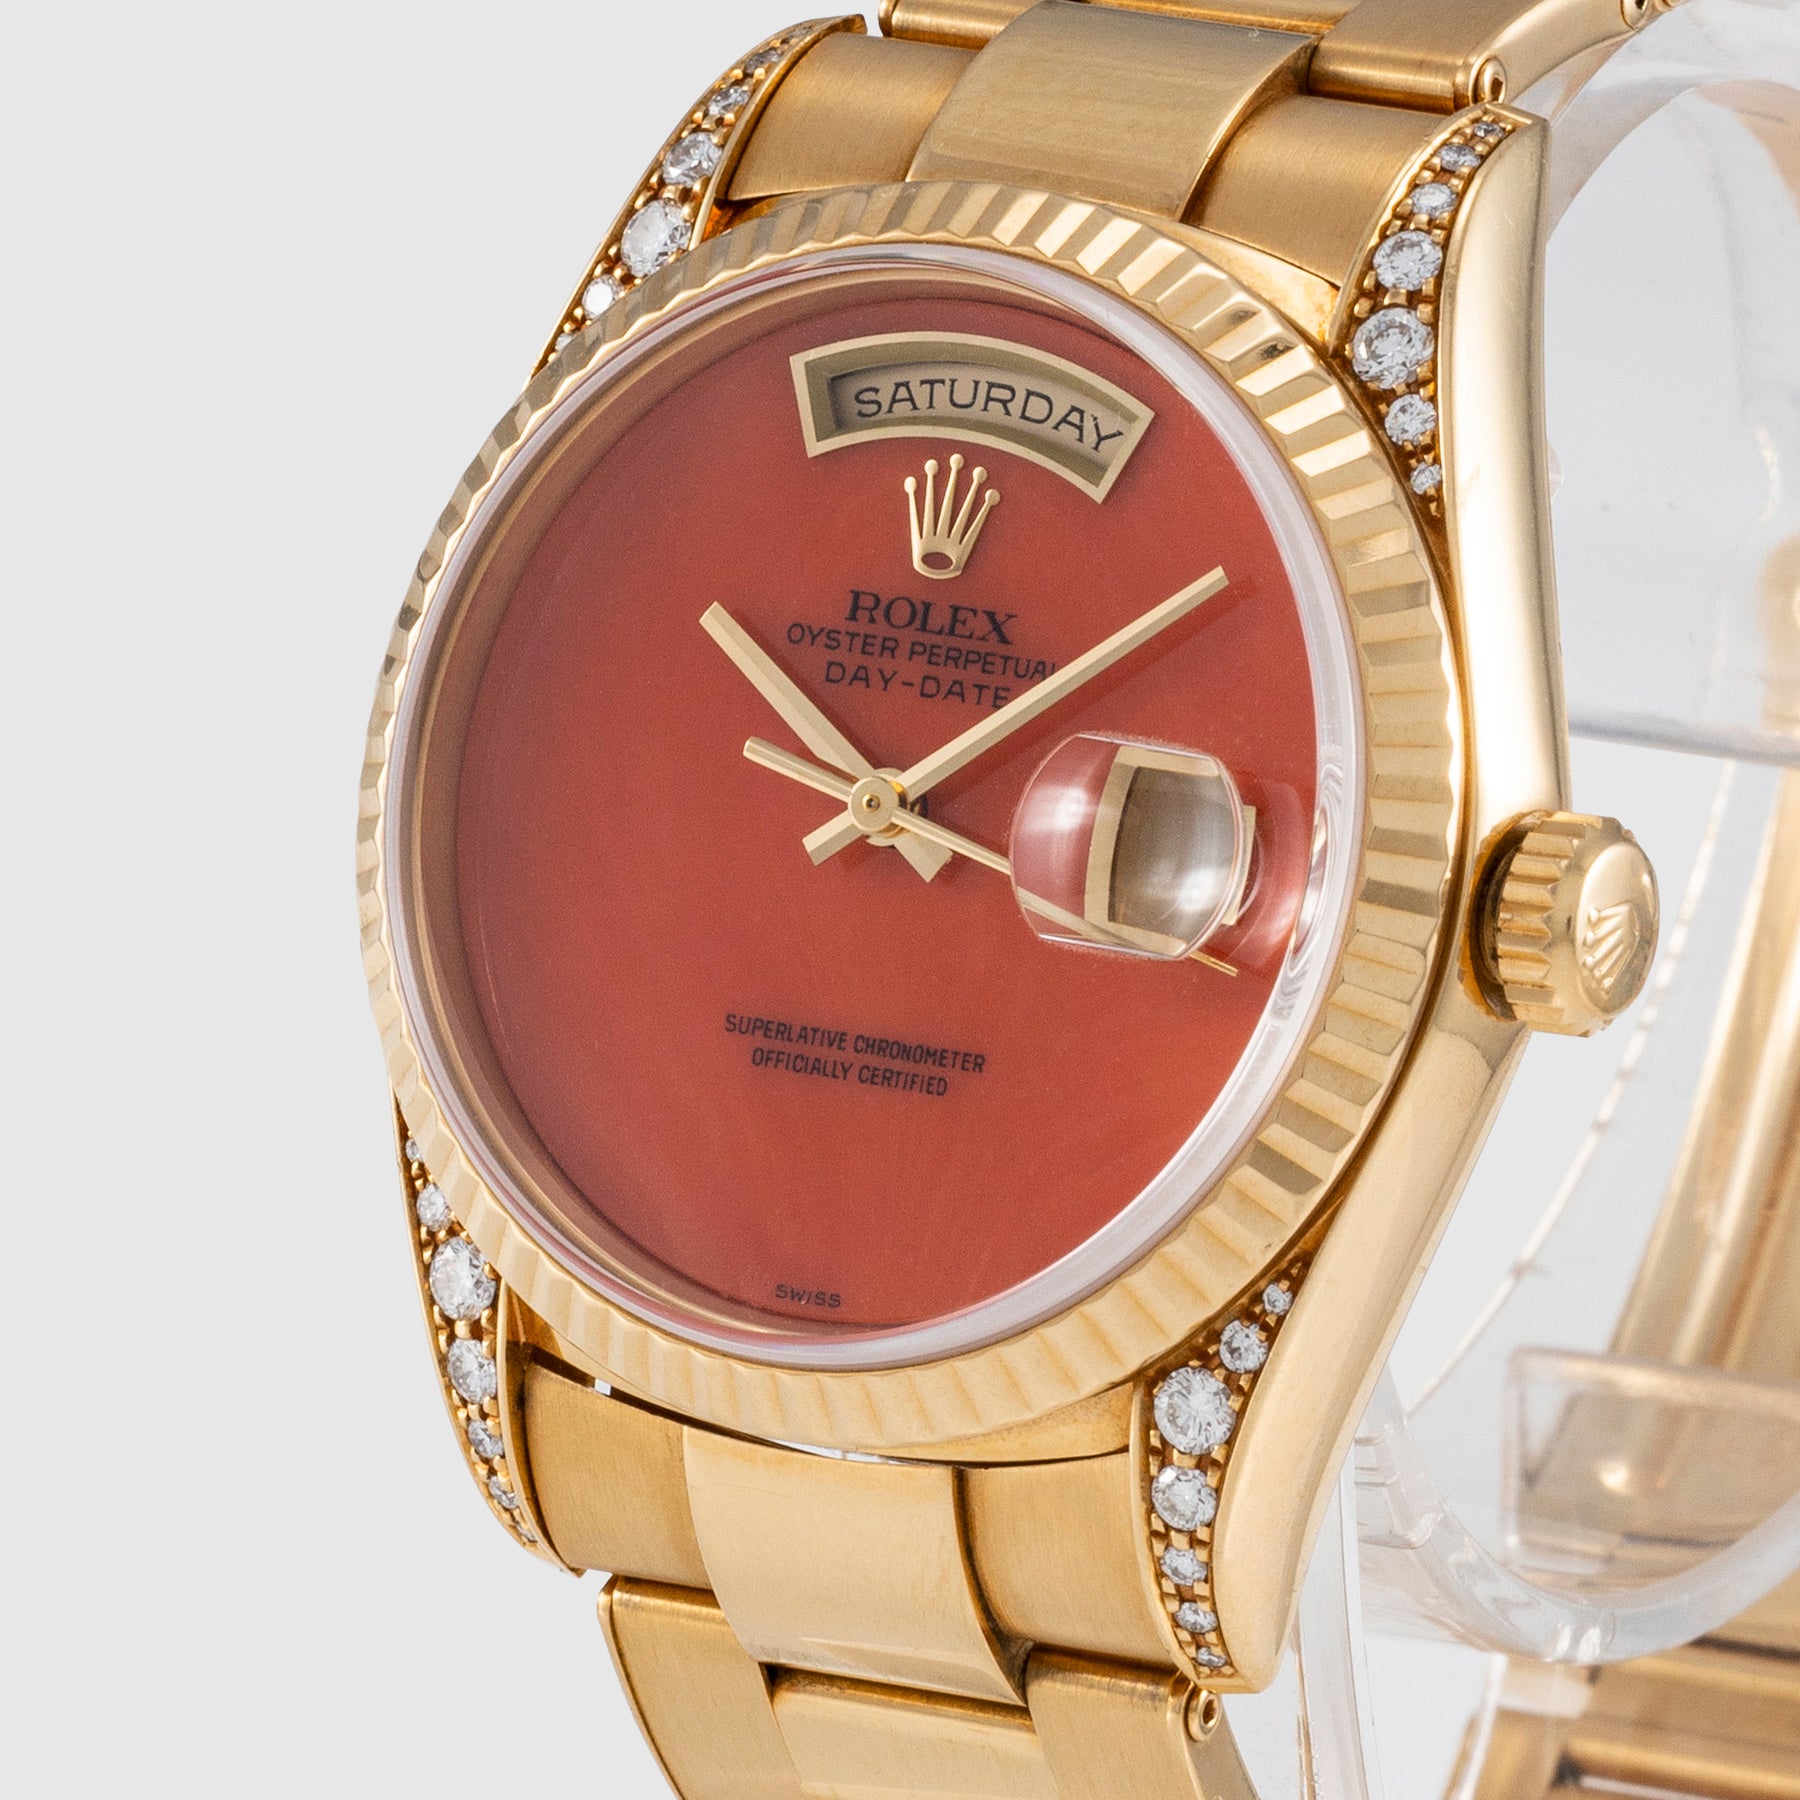 1994 Rolex Day Date Coral Dial Ref. 18338 (Full Set)